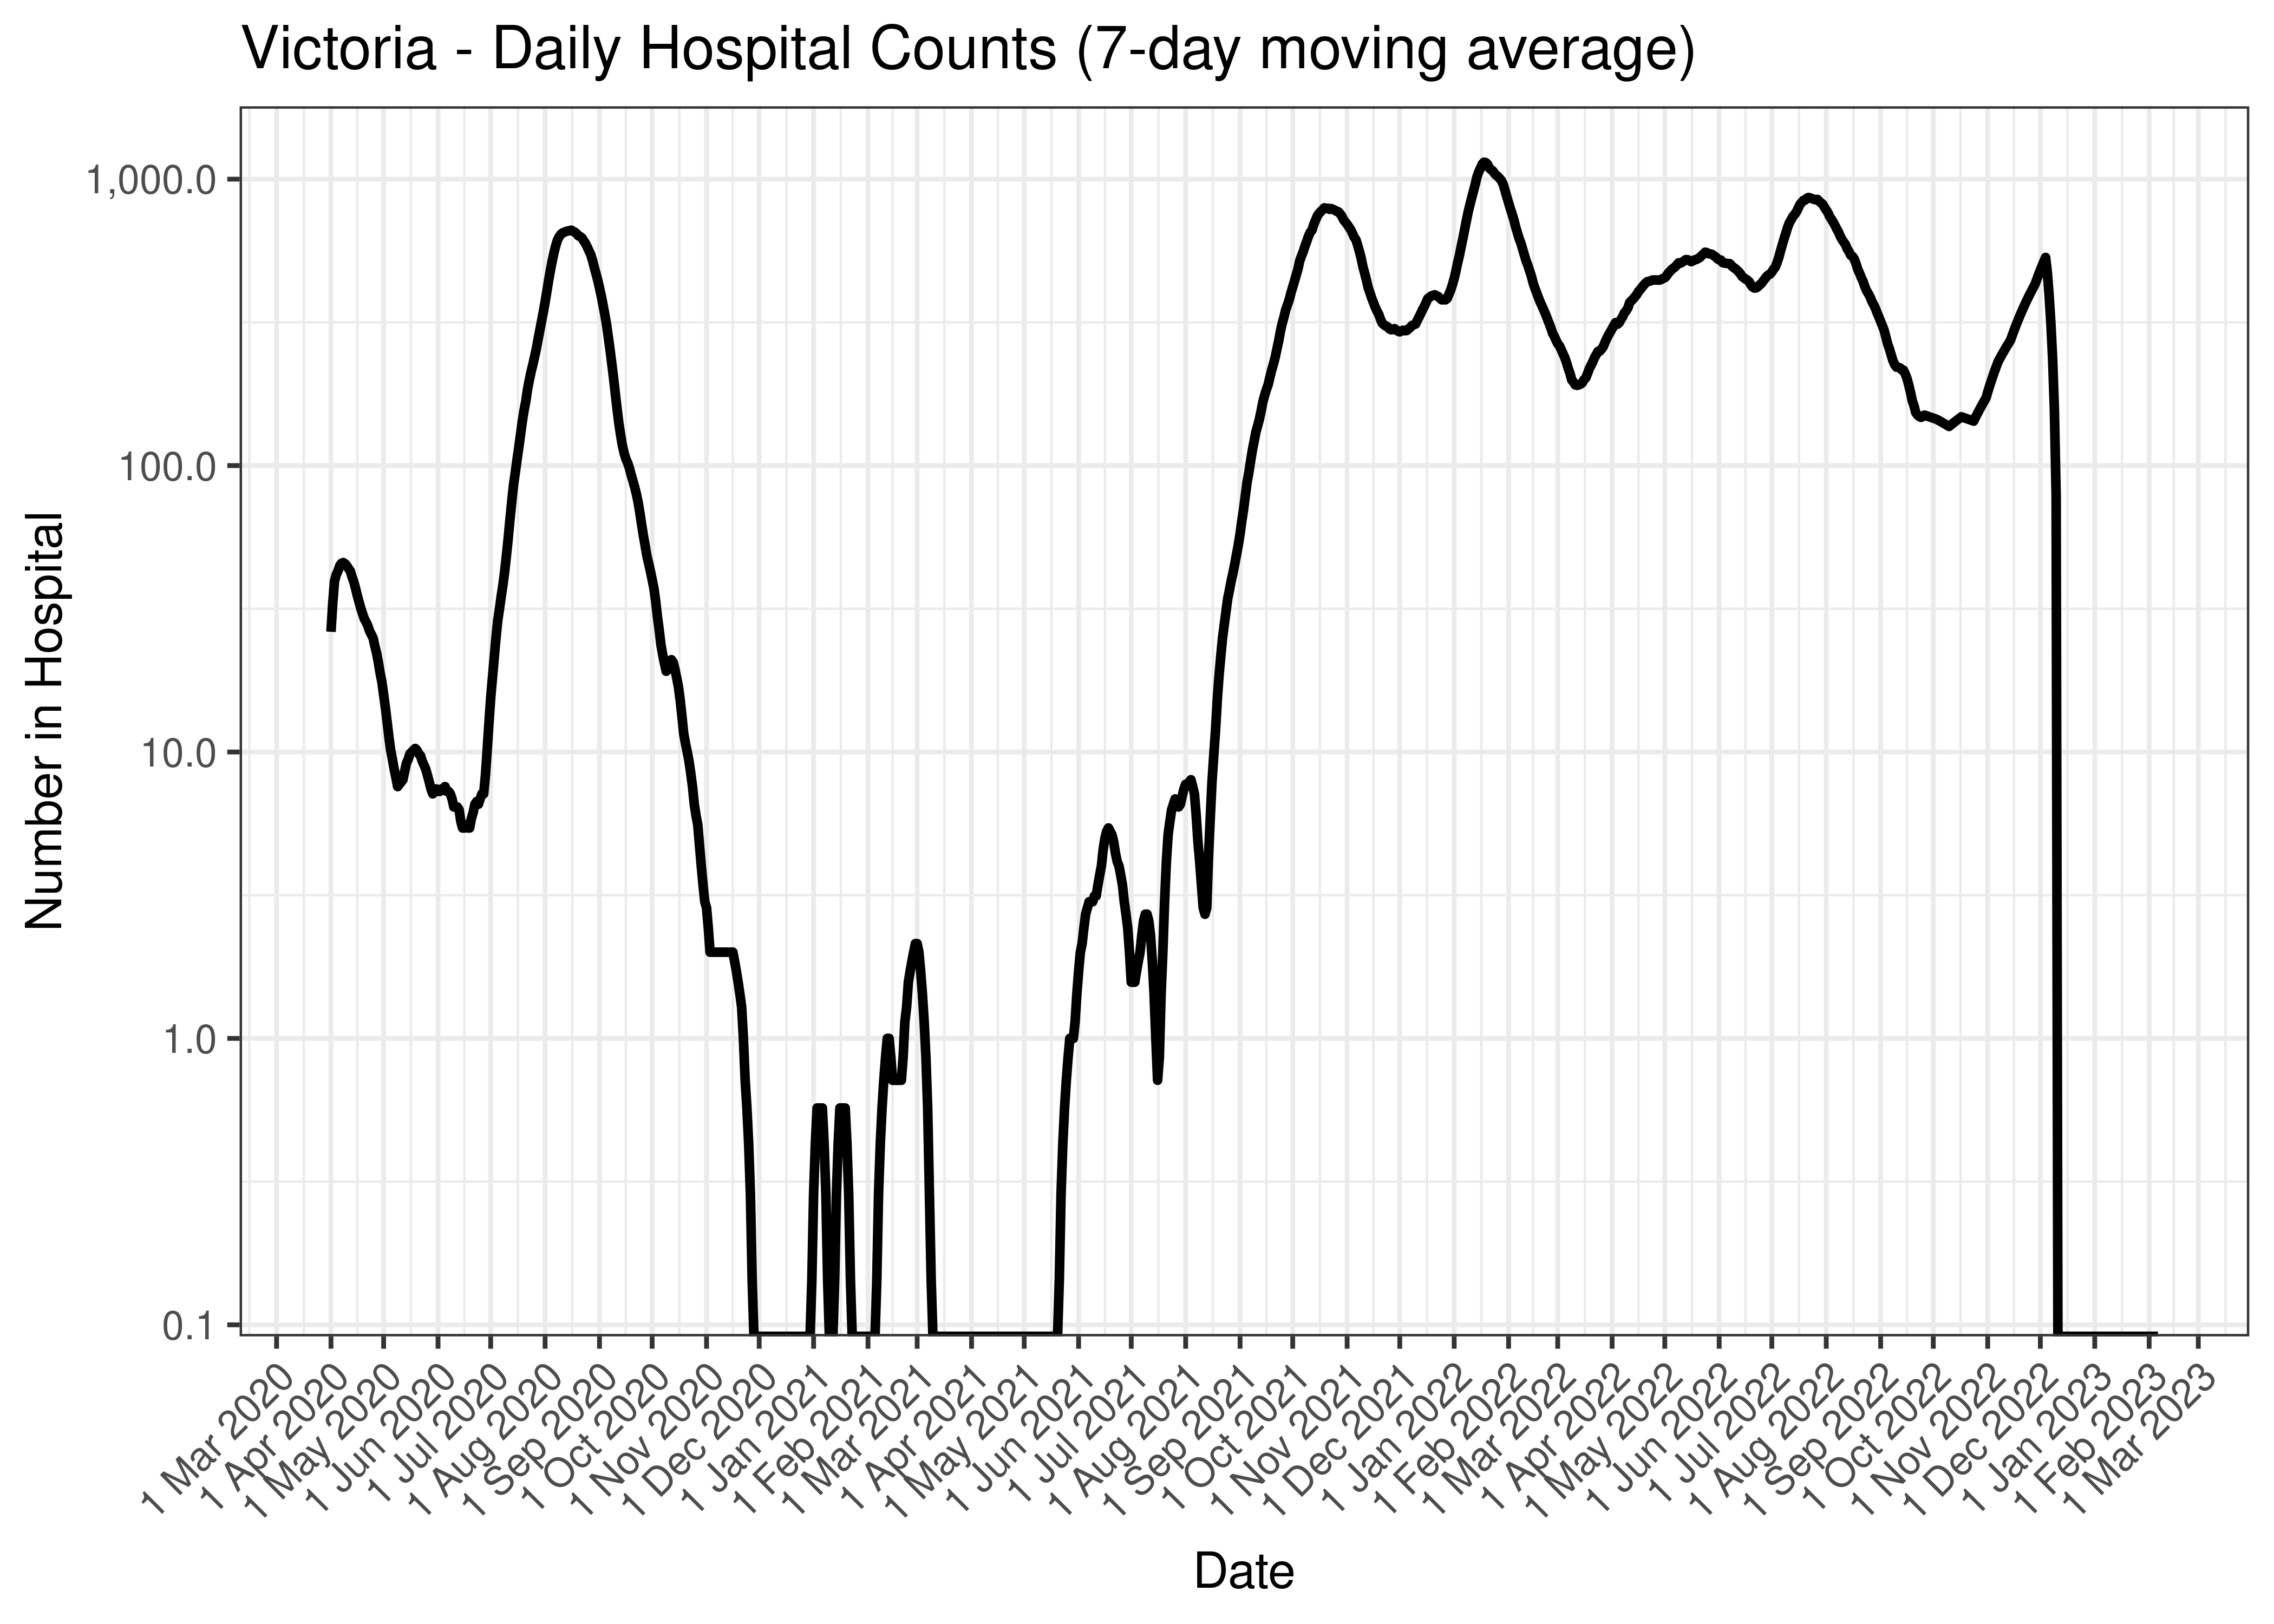 Tasmania - Daily Cases, Hospital Counts and Deaths (7-day moving average)